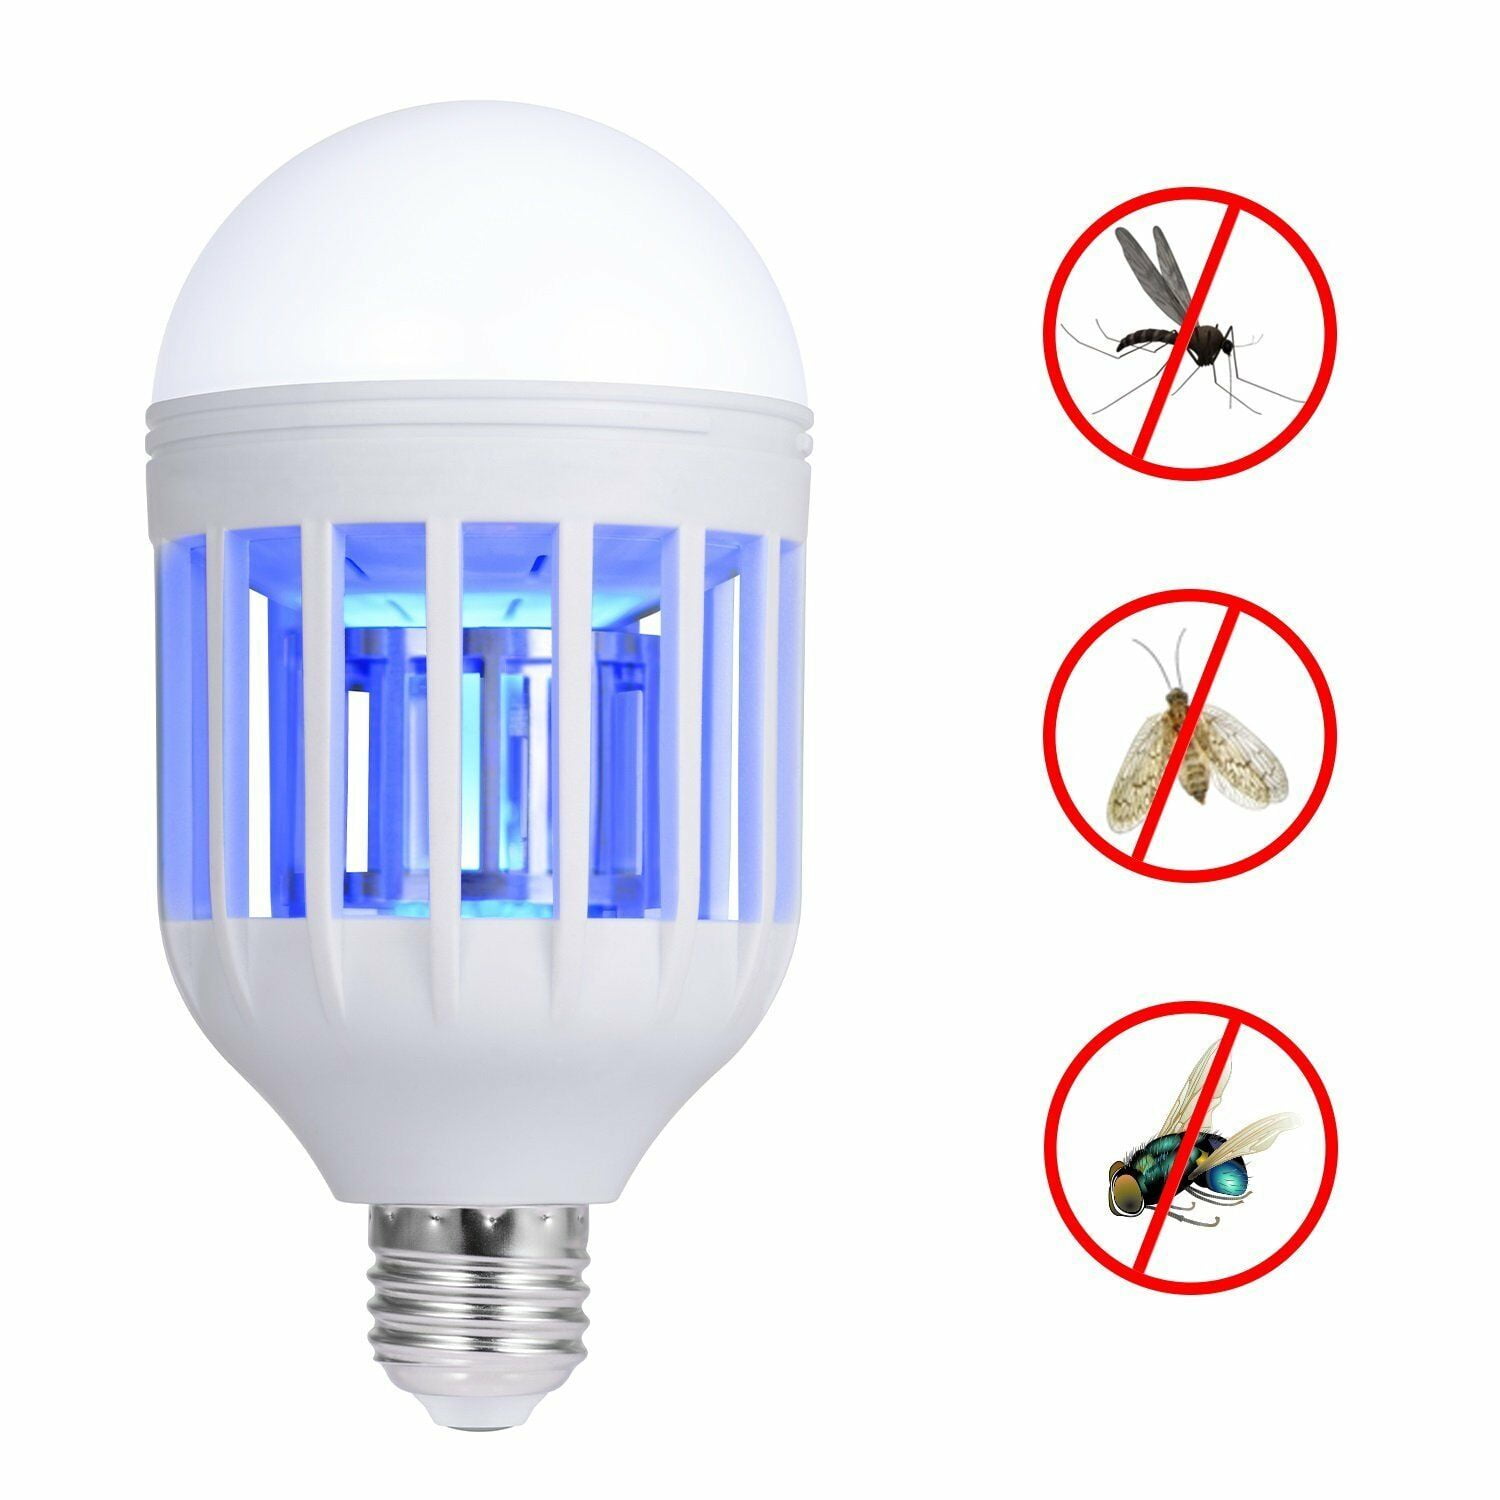 LED Mosquito Killer Lamp Bulb Electric Trap Light Electronic Anti Insect Bug Was 